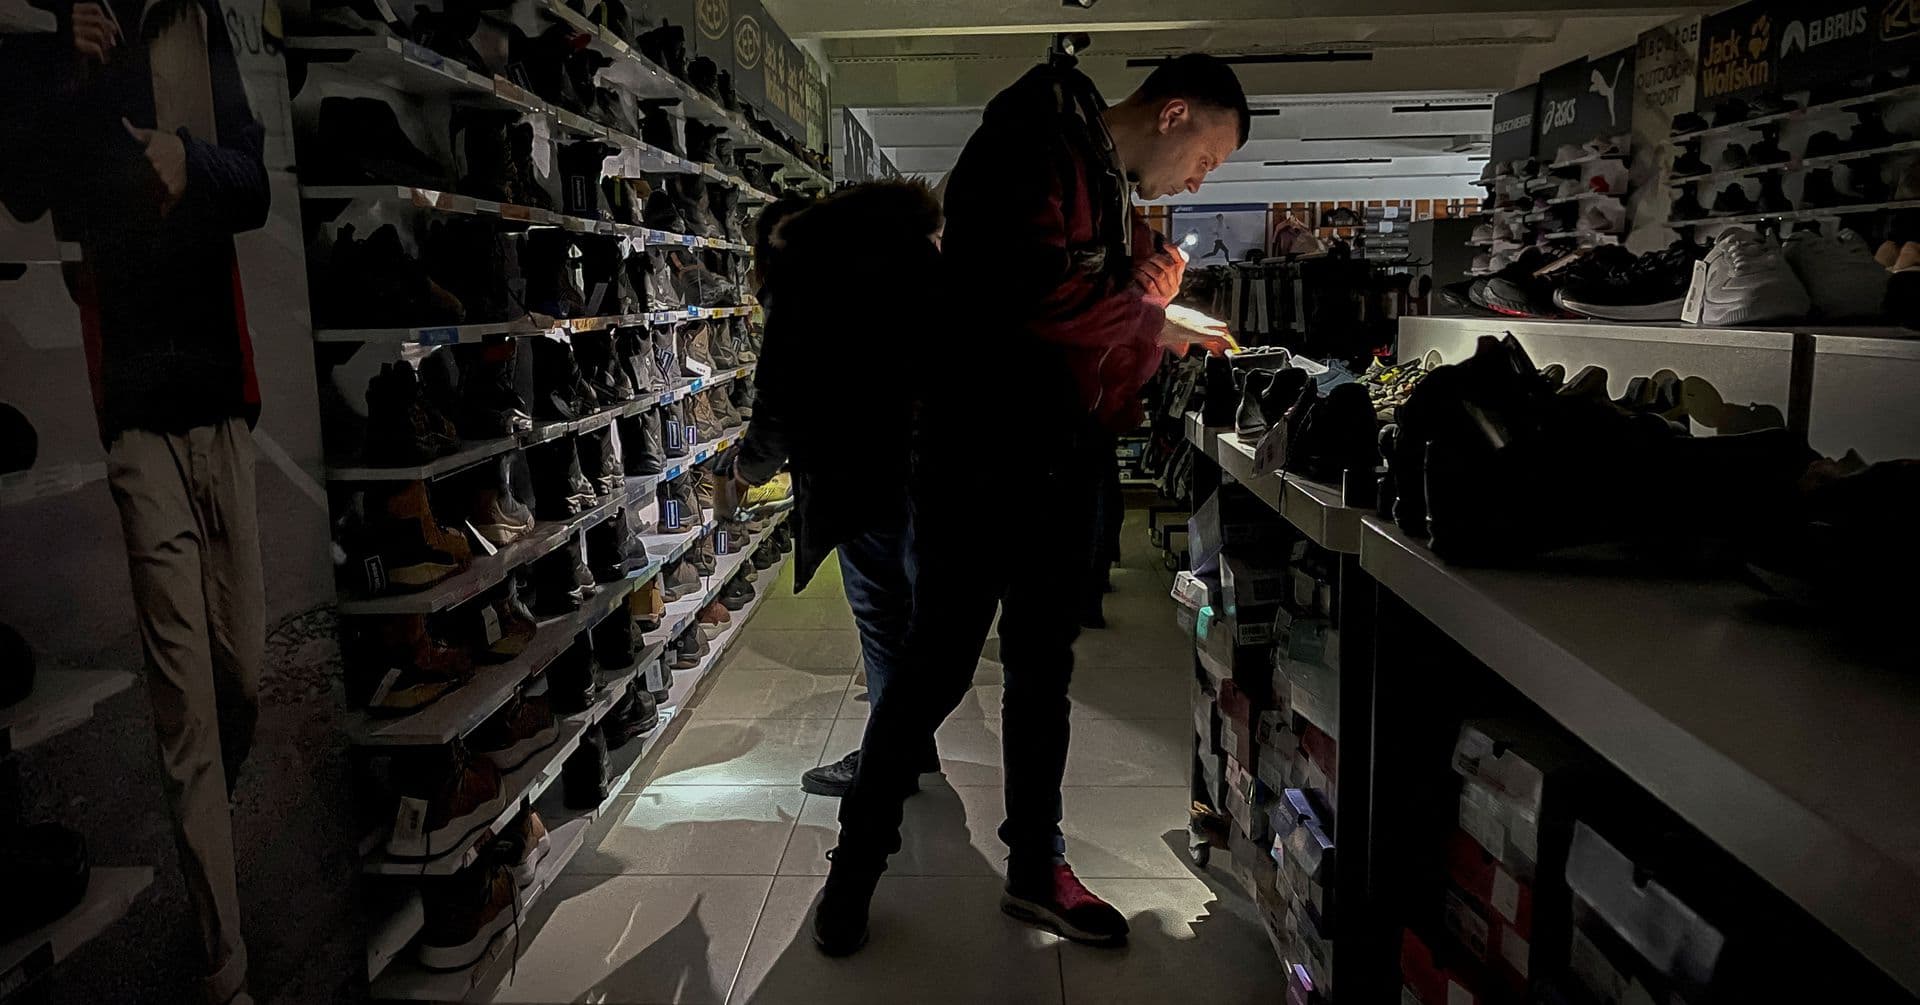 People use their mobile phone lamps to look at items at a sporting goods store during a power outage in Kyiv